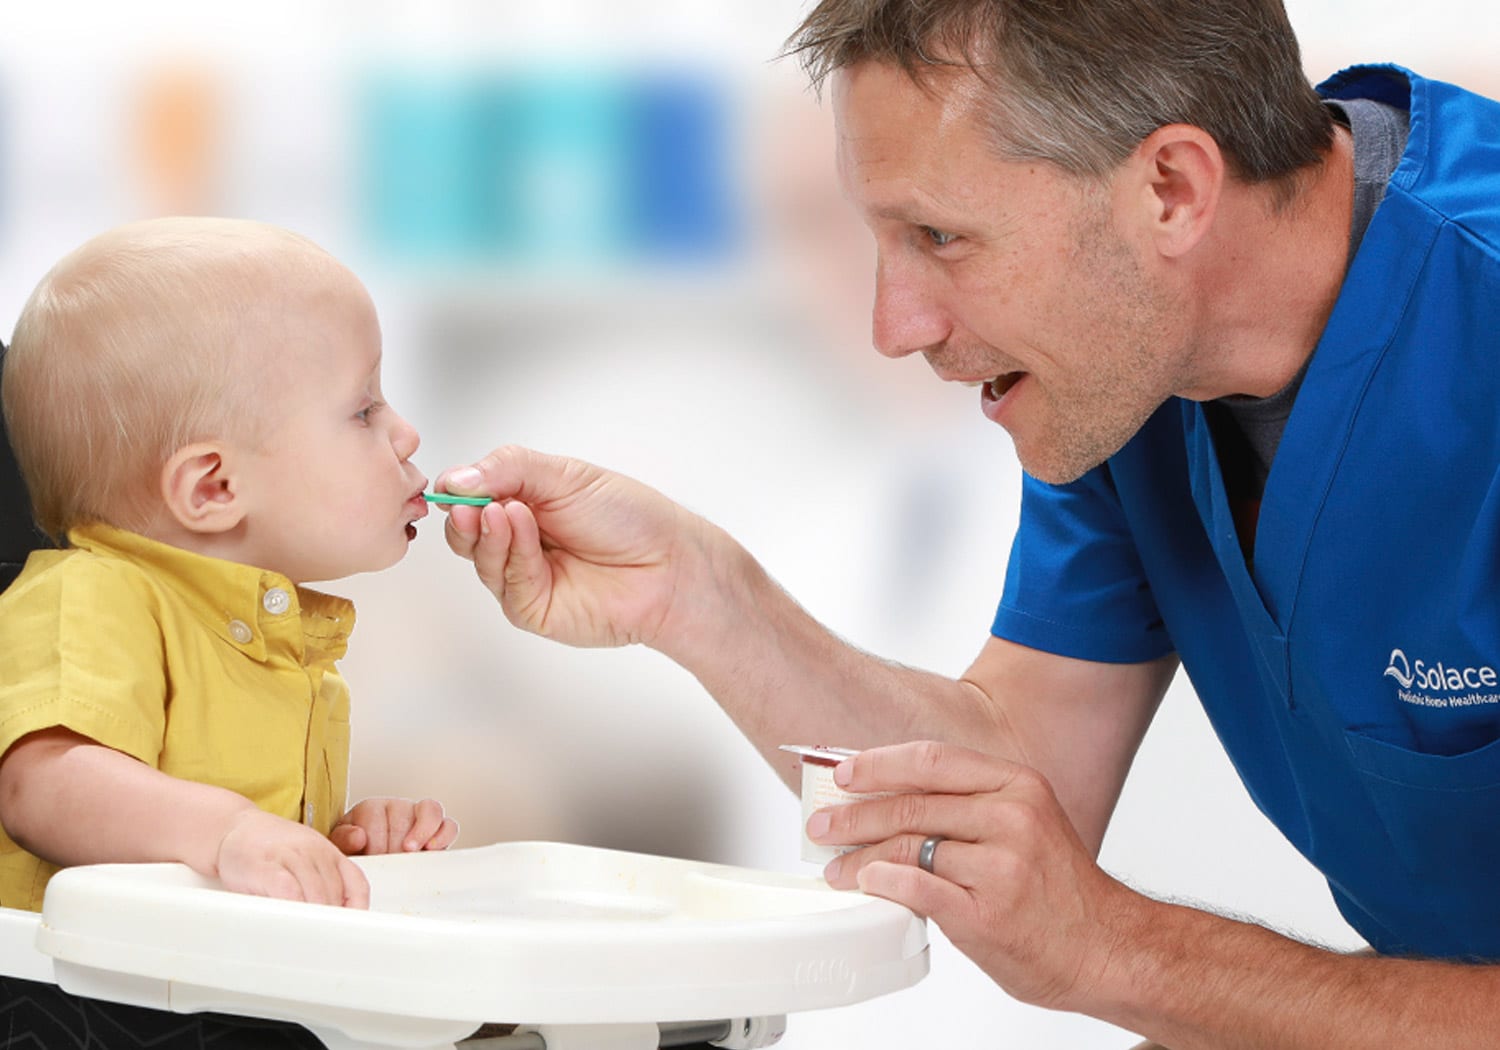 Our team of pediatric occupational therapists, physical therapists and SLPs also specialize in feeding and swallowing therapy in your home.